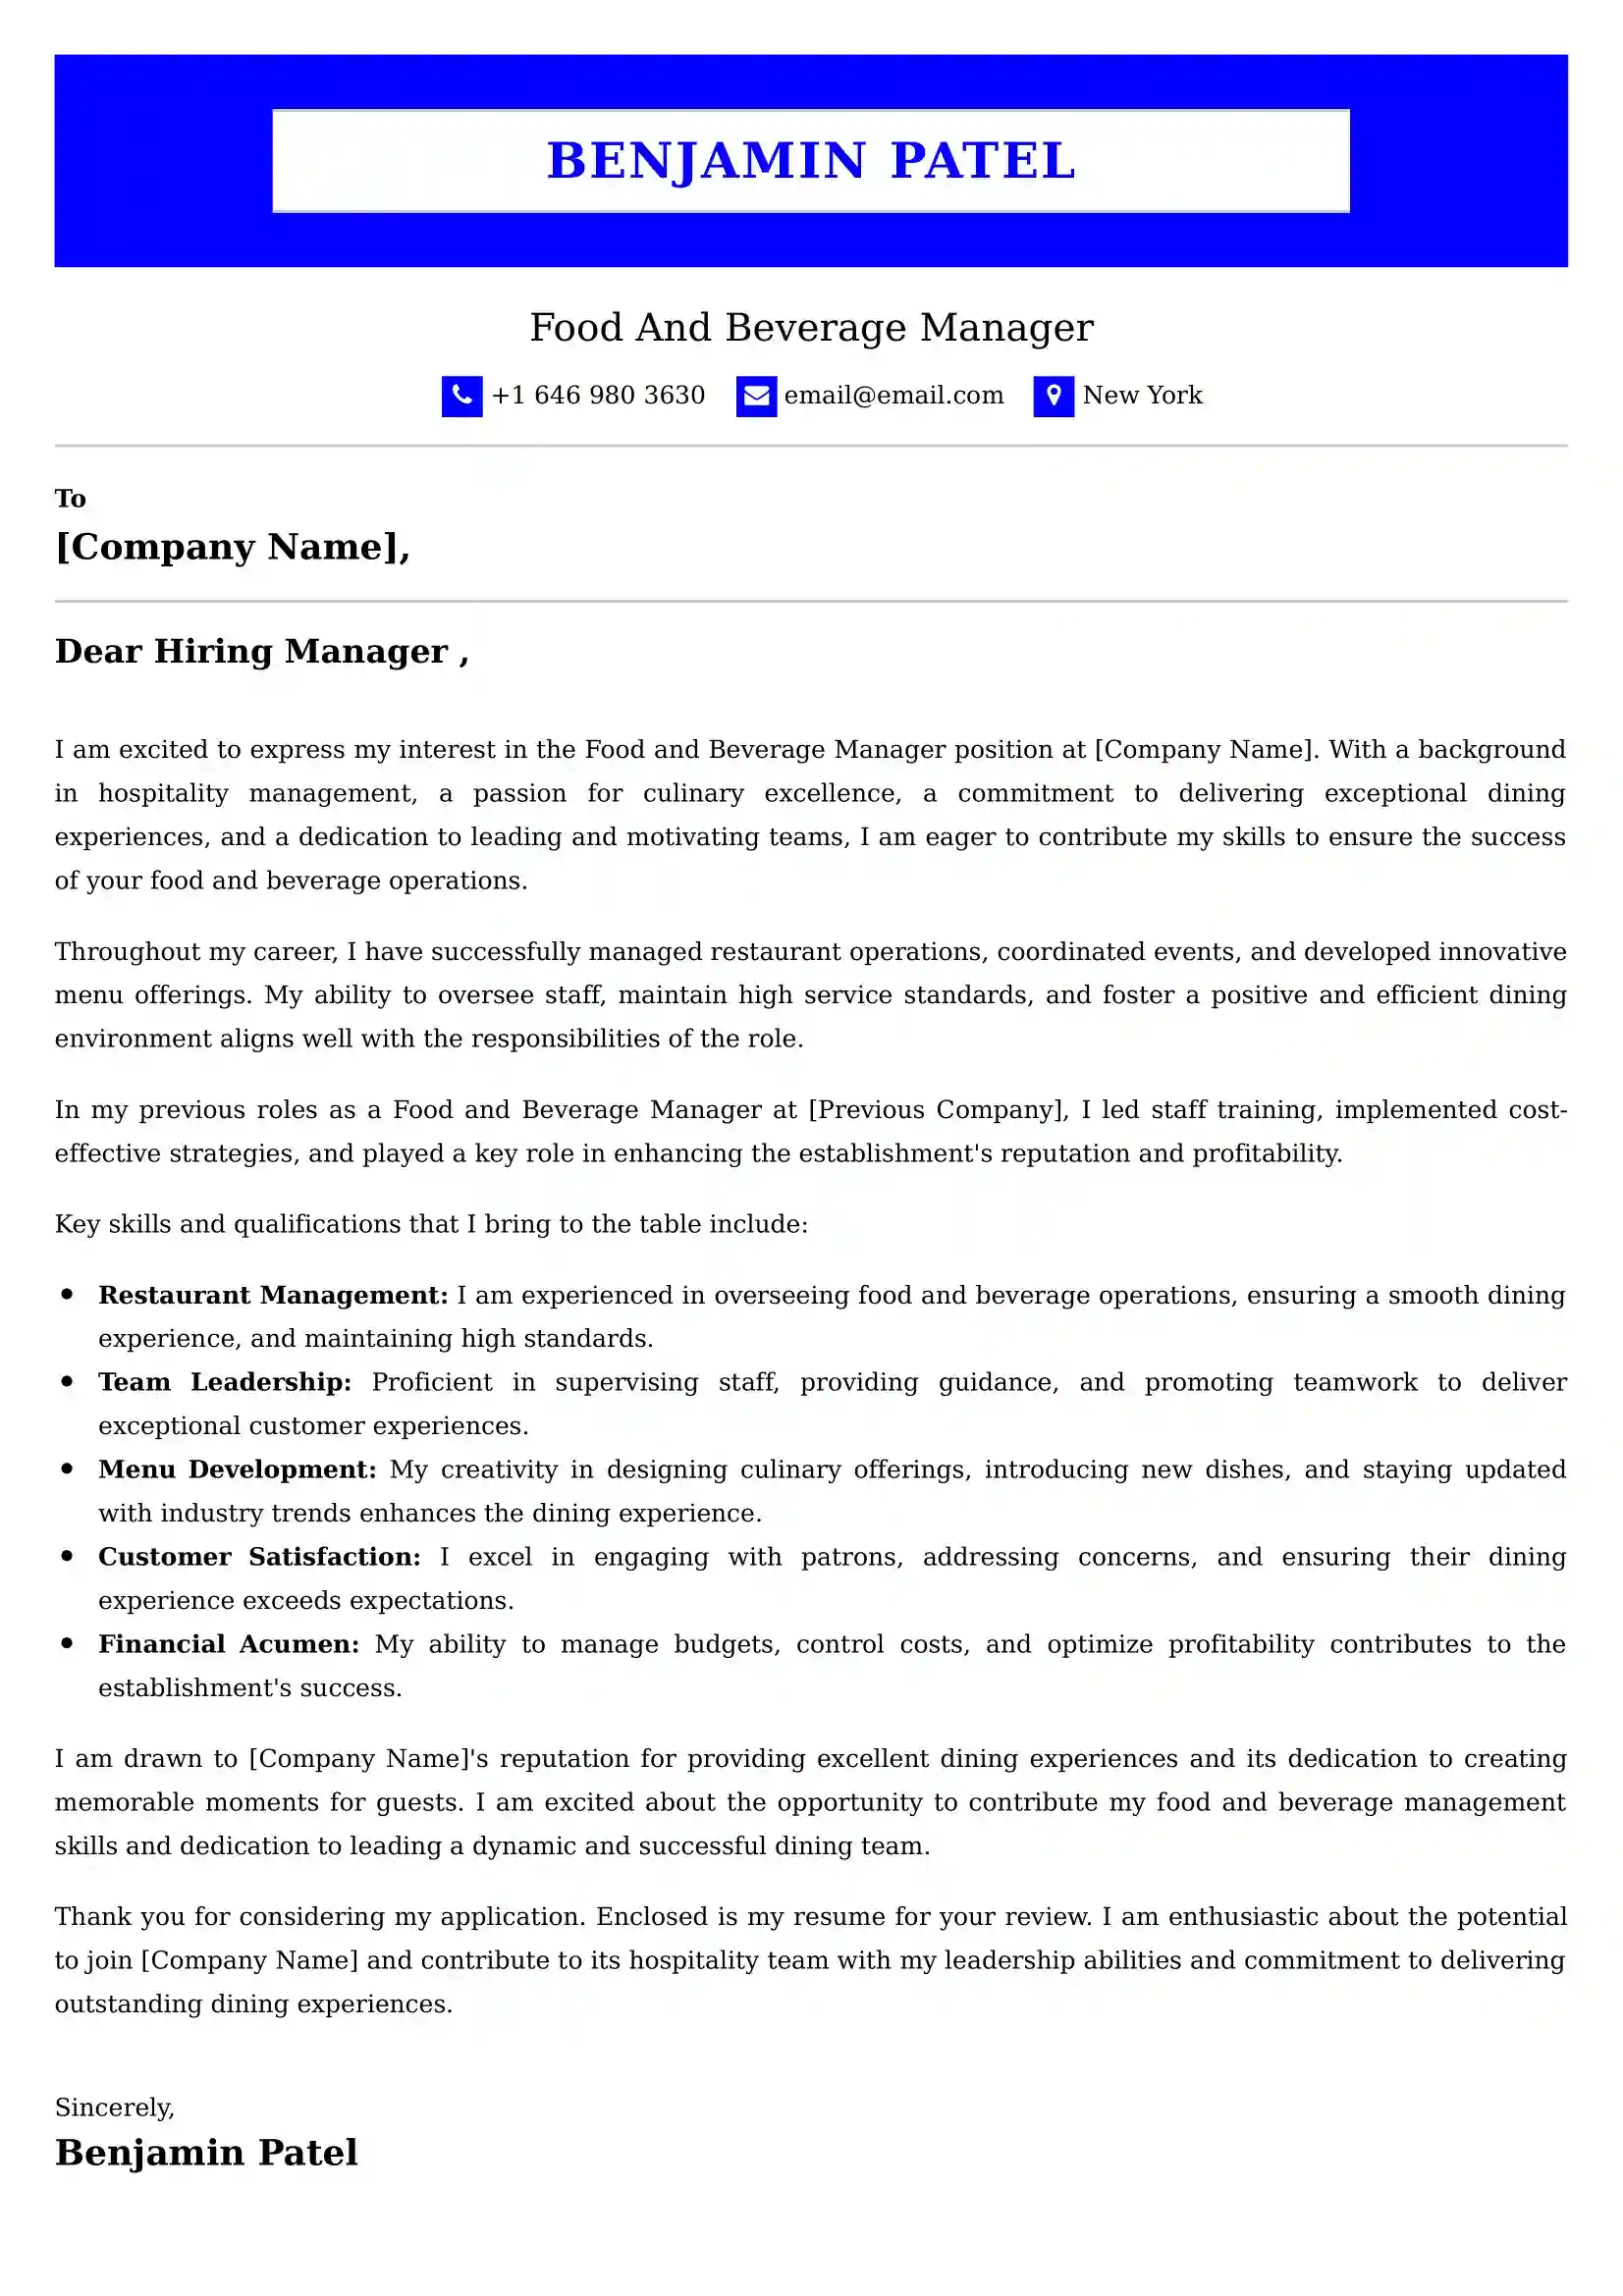 Food And Beverage Manager Cover Letter Examples UK - Tips and Guide